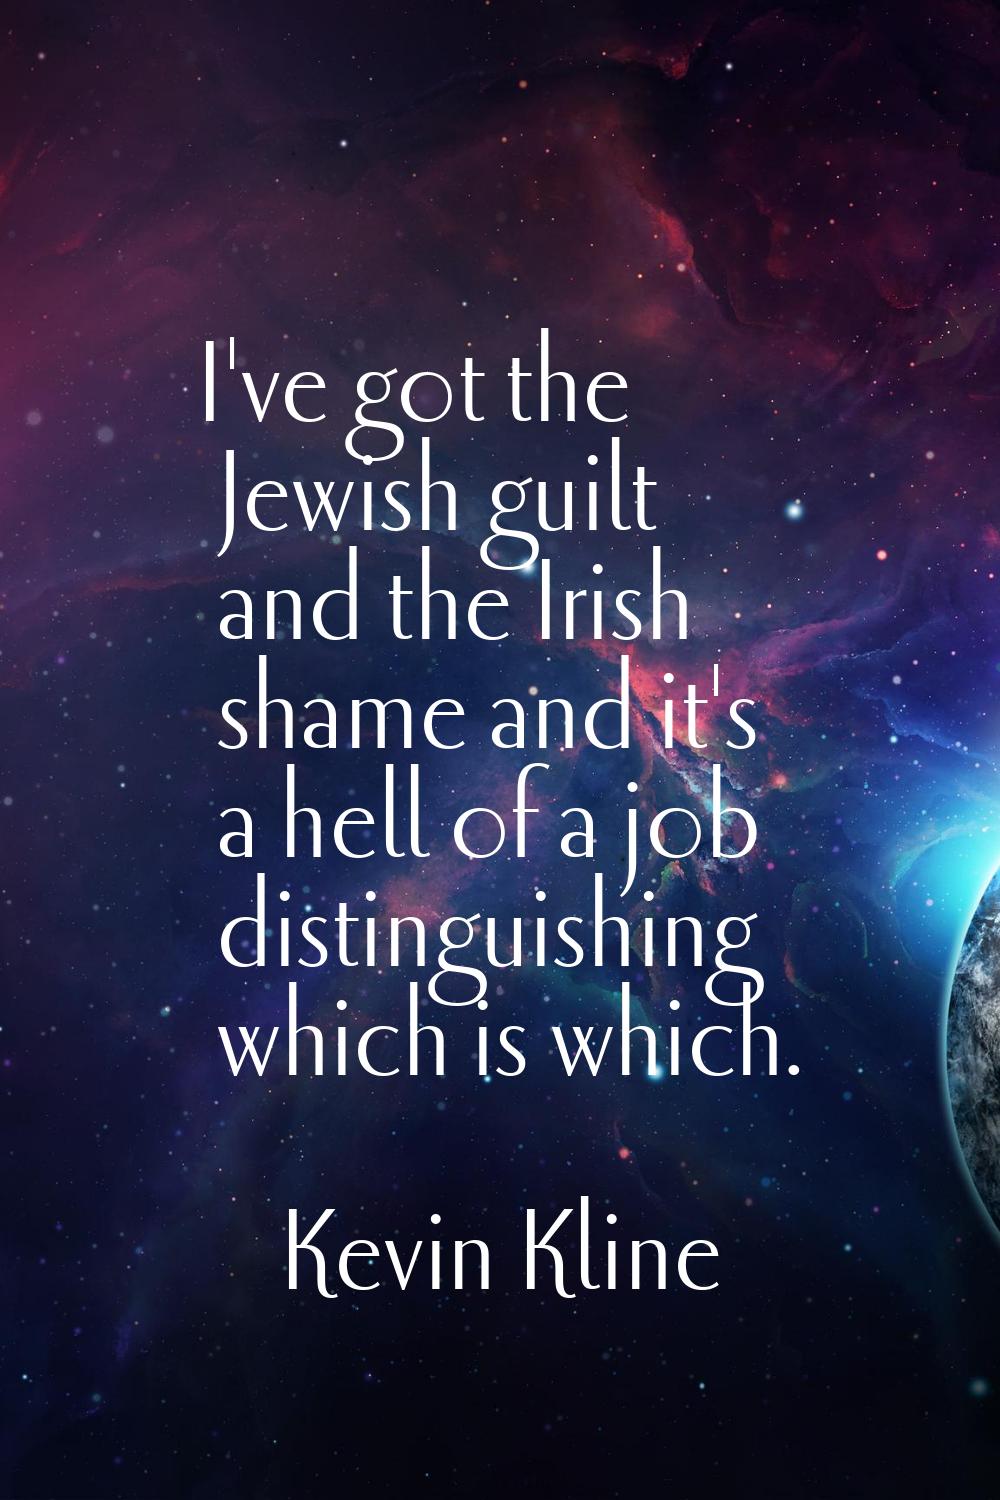 I've got the Jewish guilt and the Irish shame and it's a hell of a job distinguishing which is whic